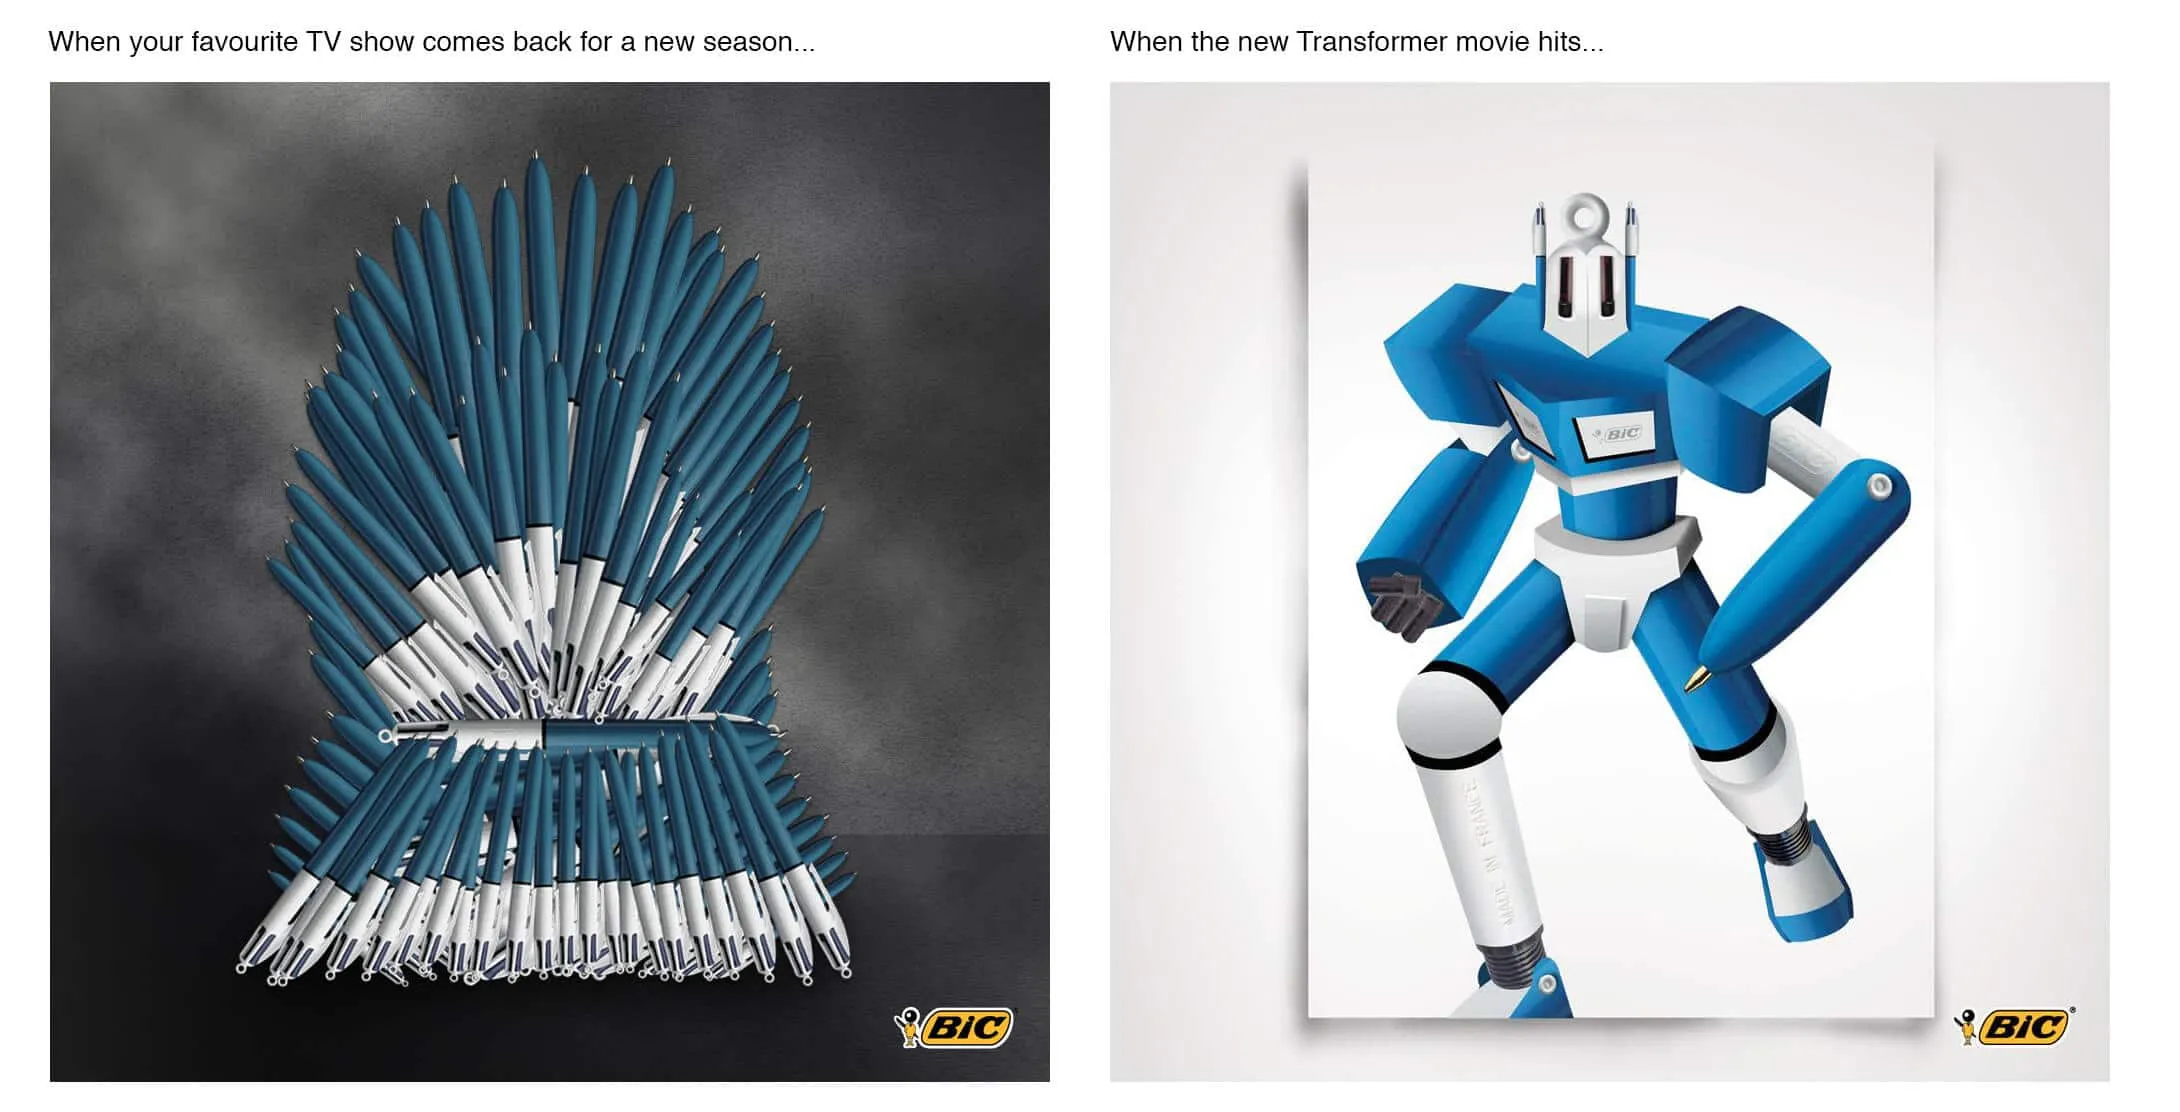 Facebook and Instagram posts for Bic 4-Colour pens with Game of Thrones and Transformer themes